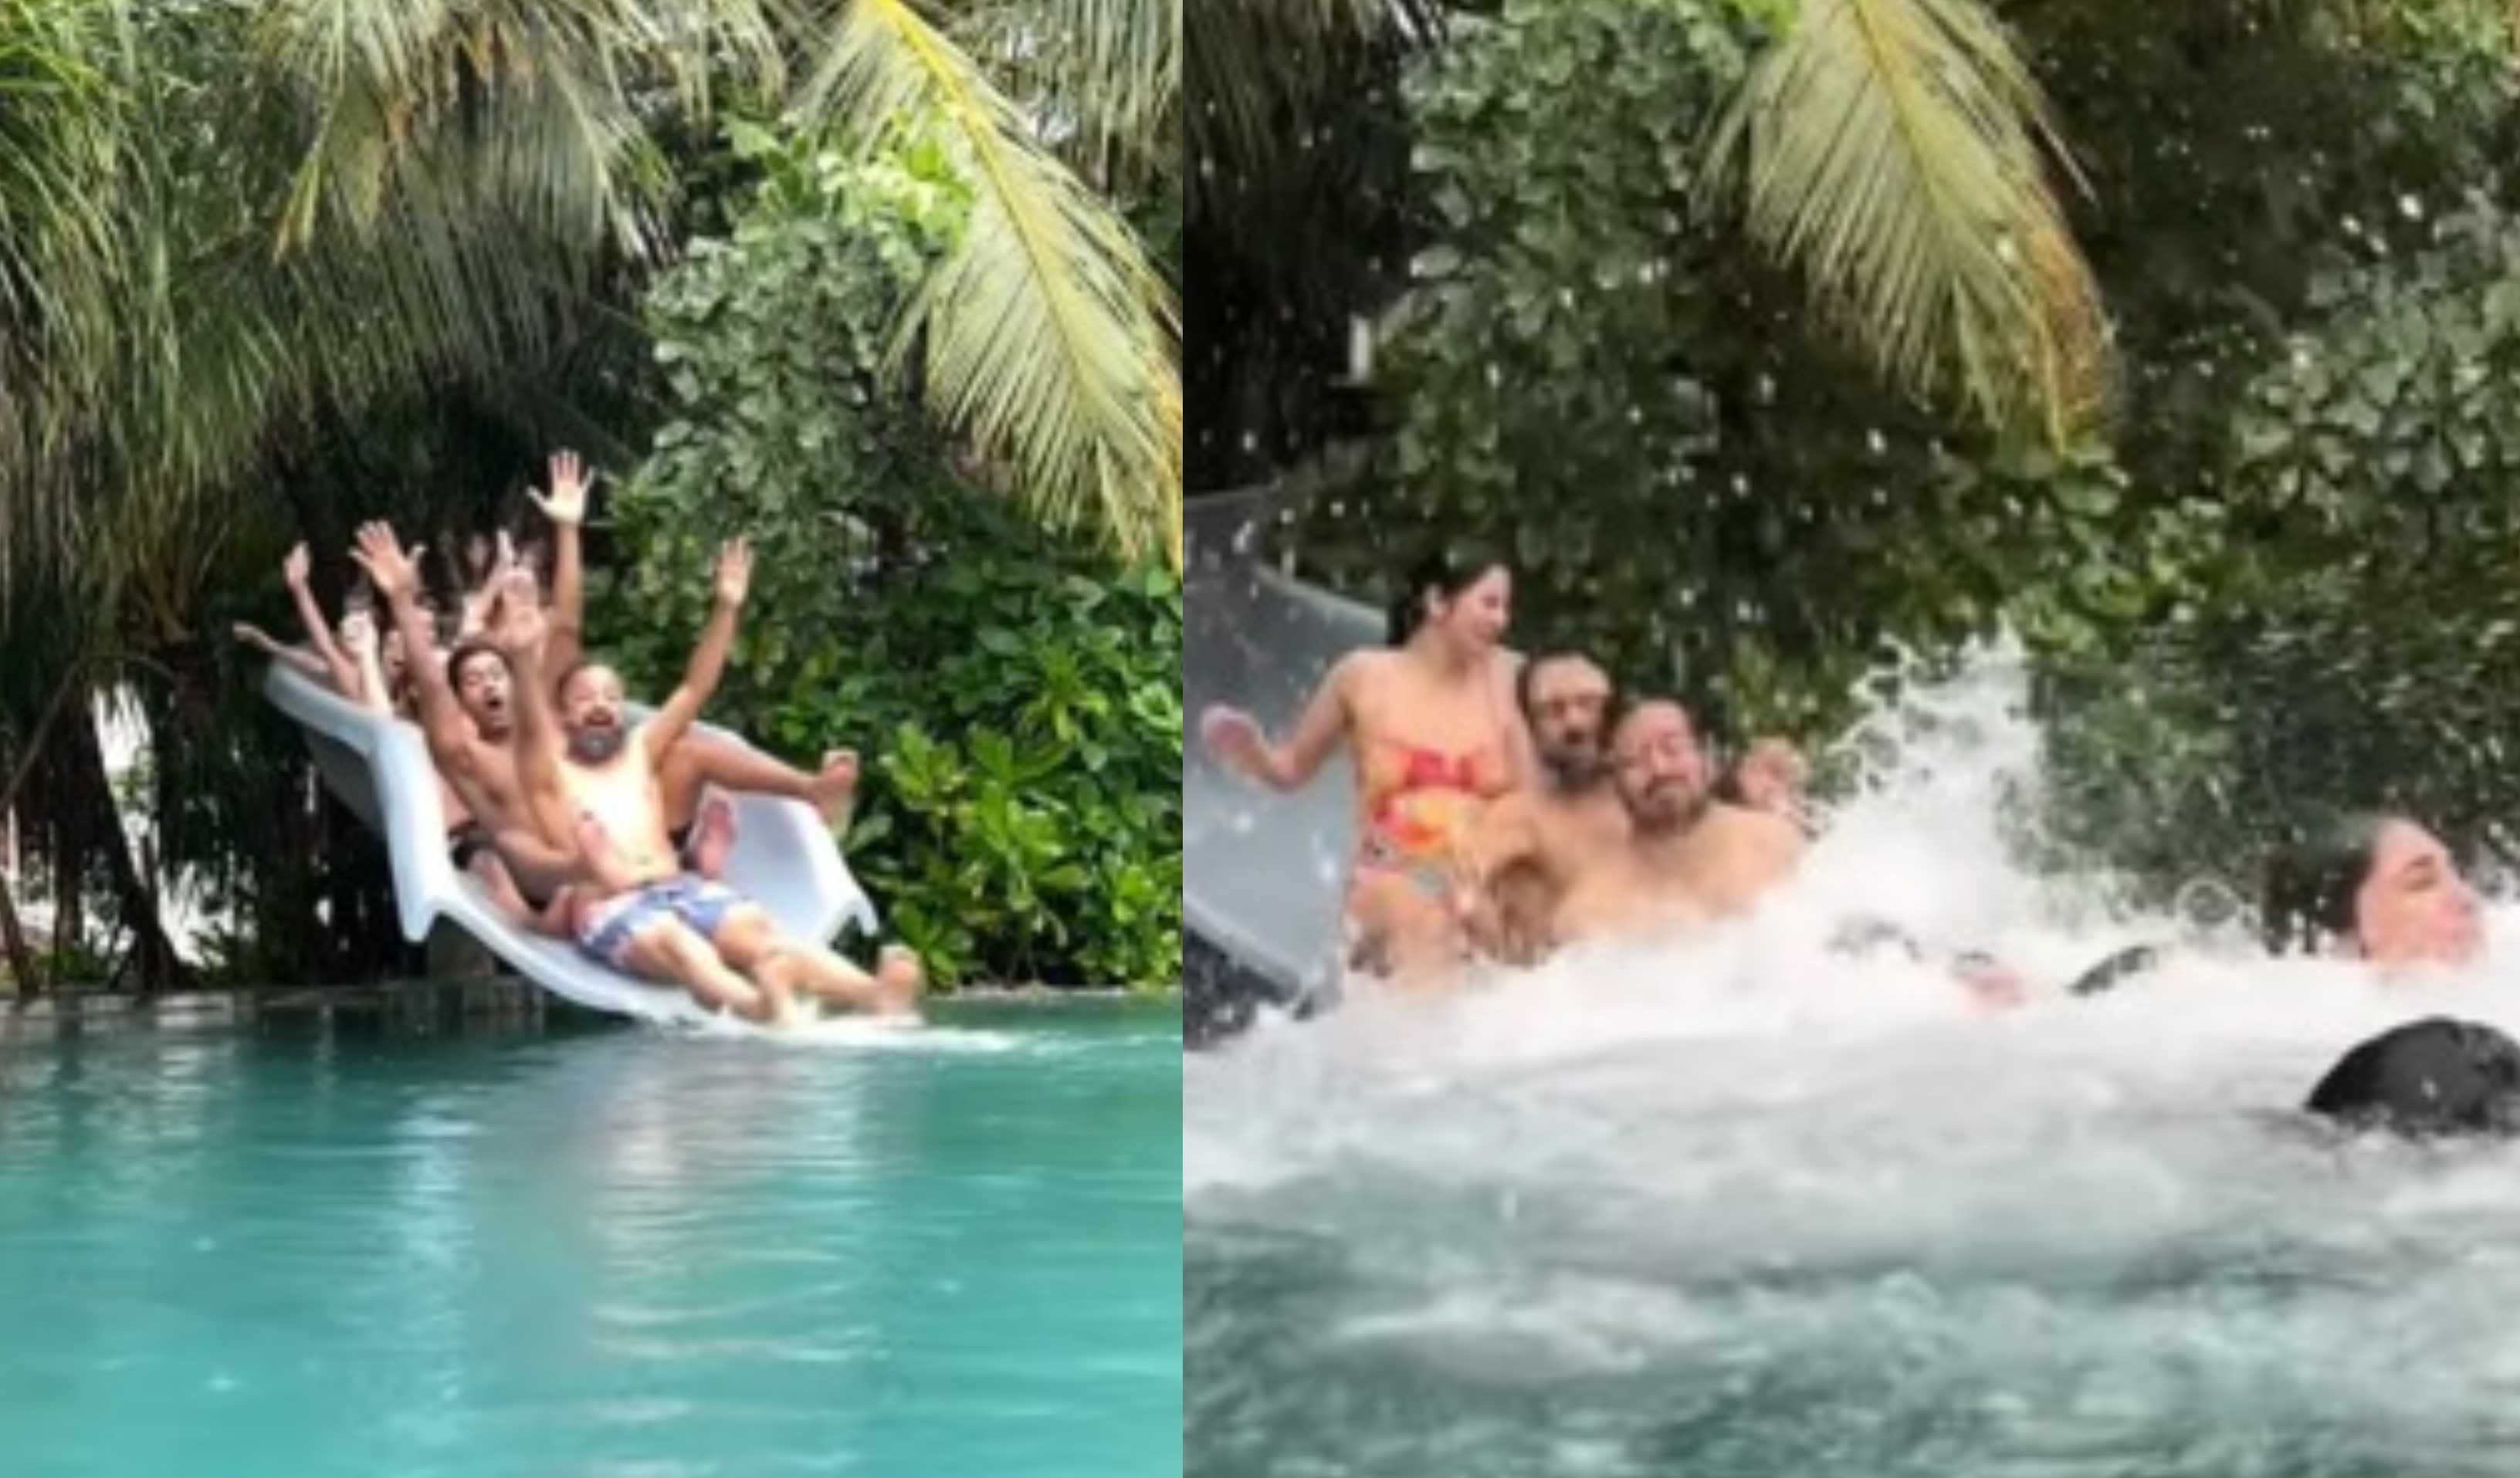 Katrina Kaif's latest video with husband Vicky Kaushal and squad will make you crave for a pool party; watch